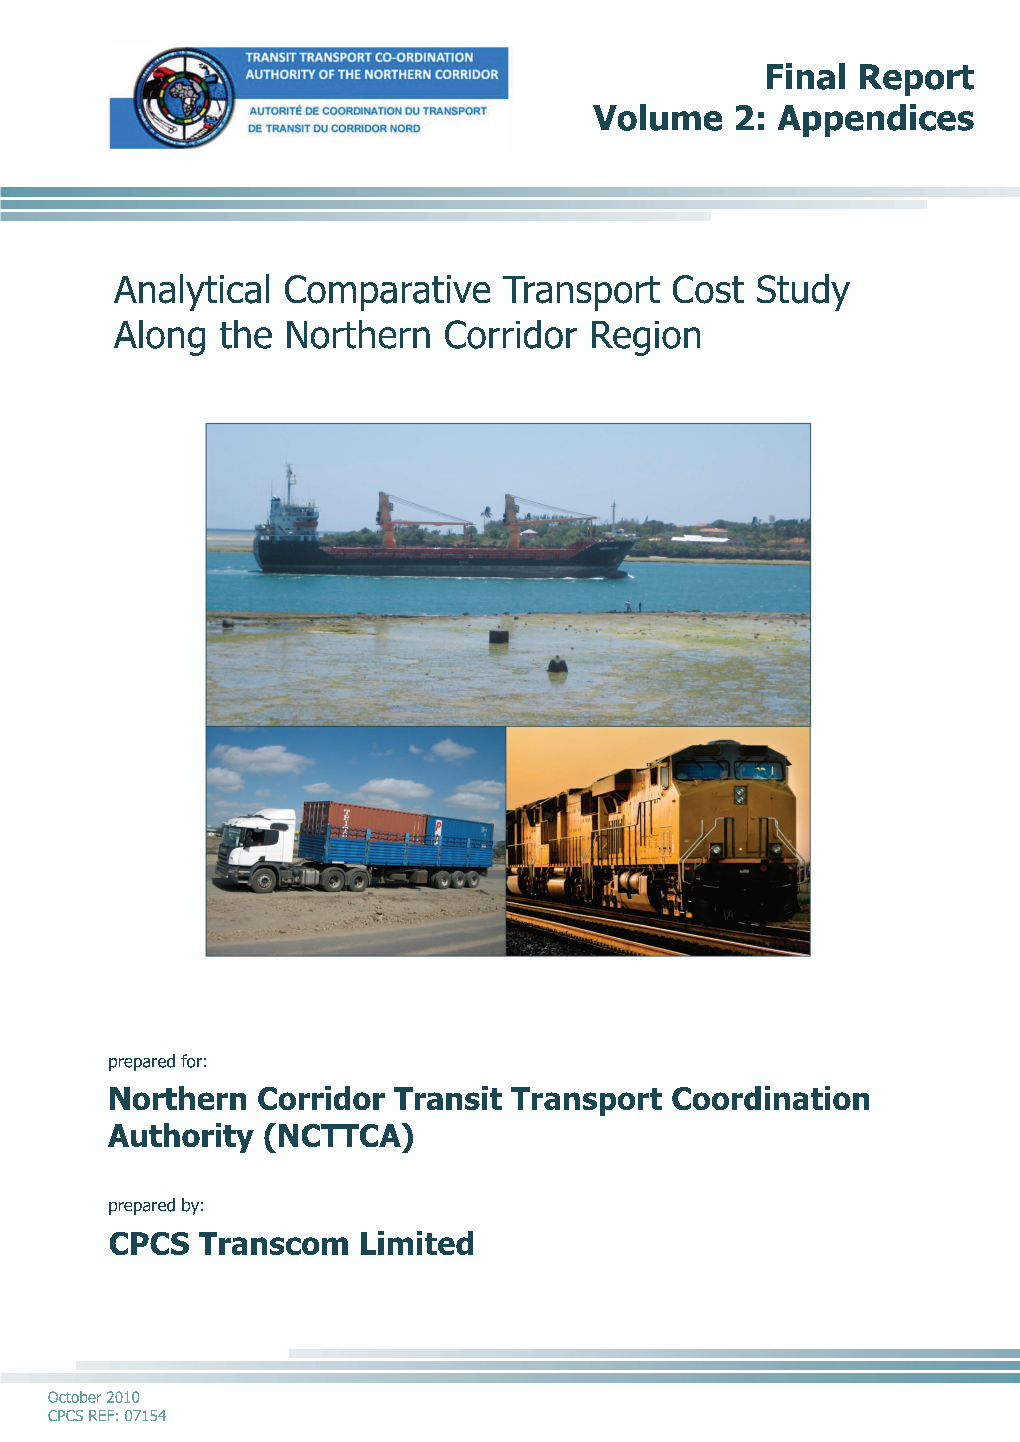 Analytical Comparative Transport Cost Study Along the Northern Corridor Region